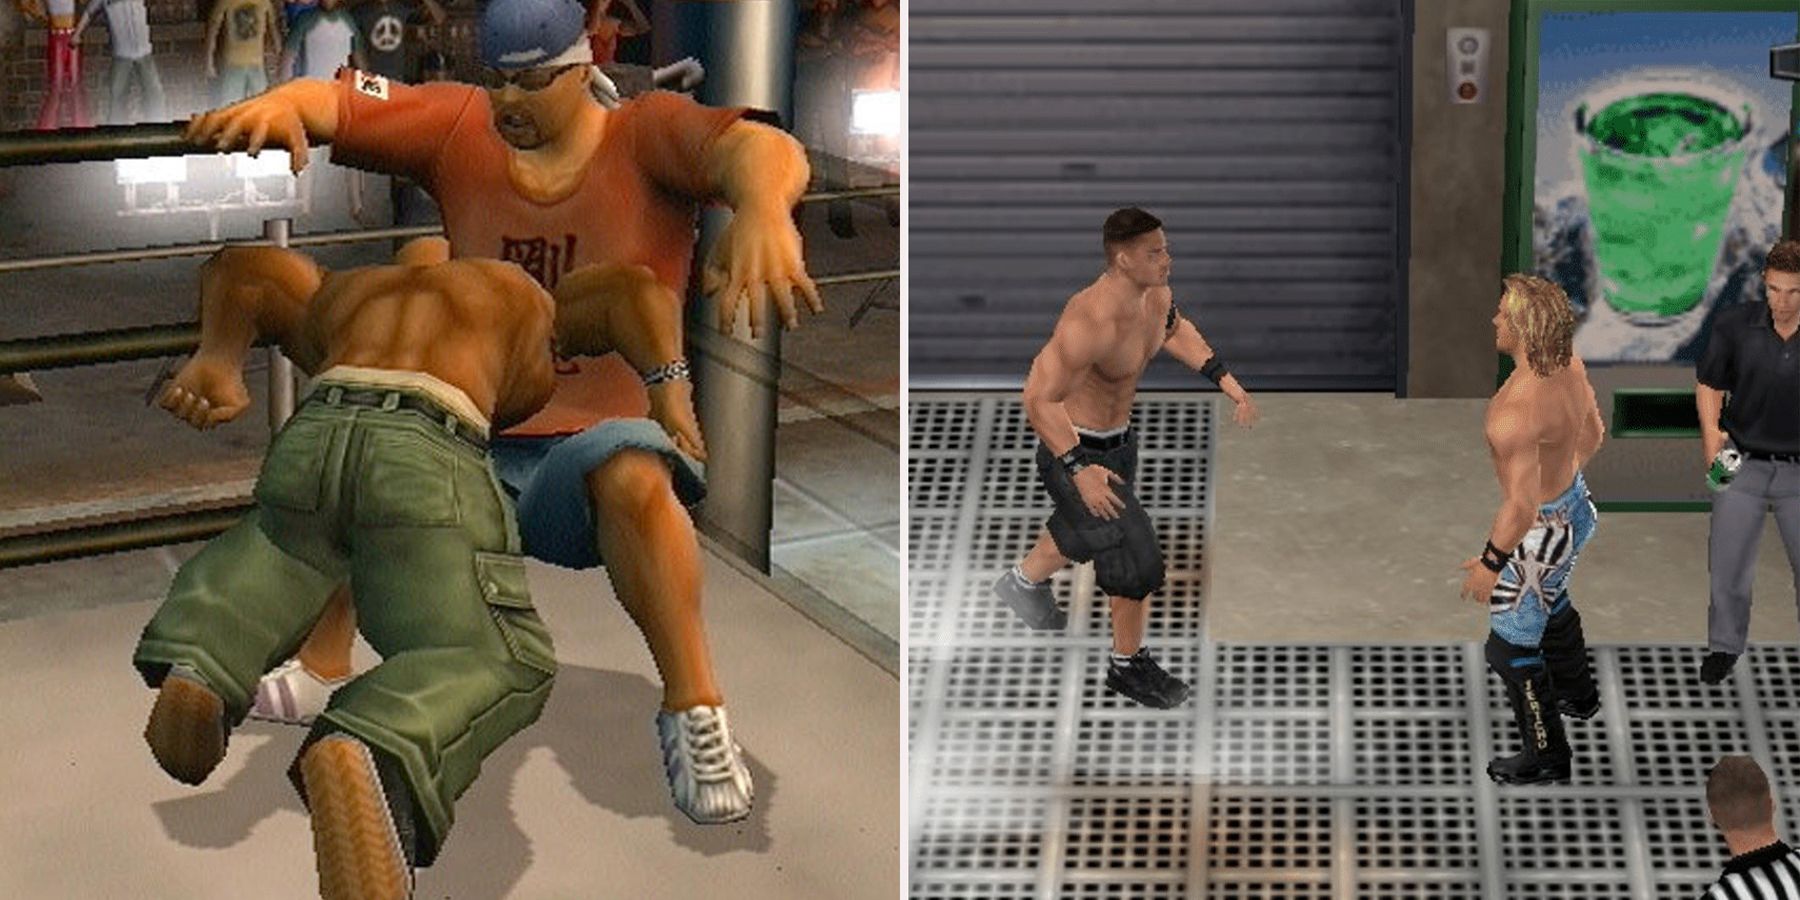 Best Wrestling Games On The PS2